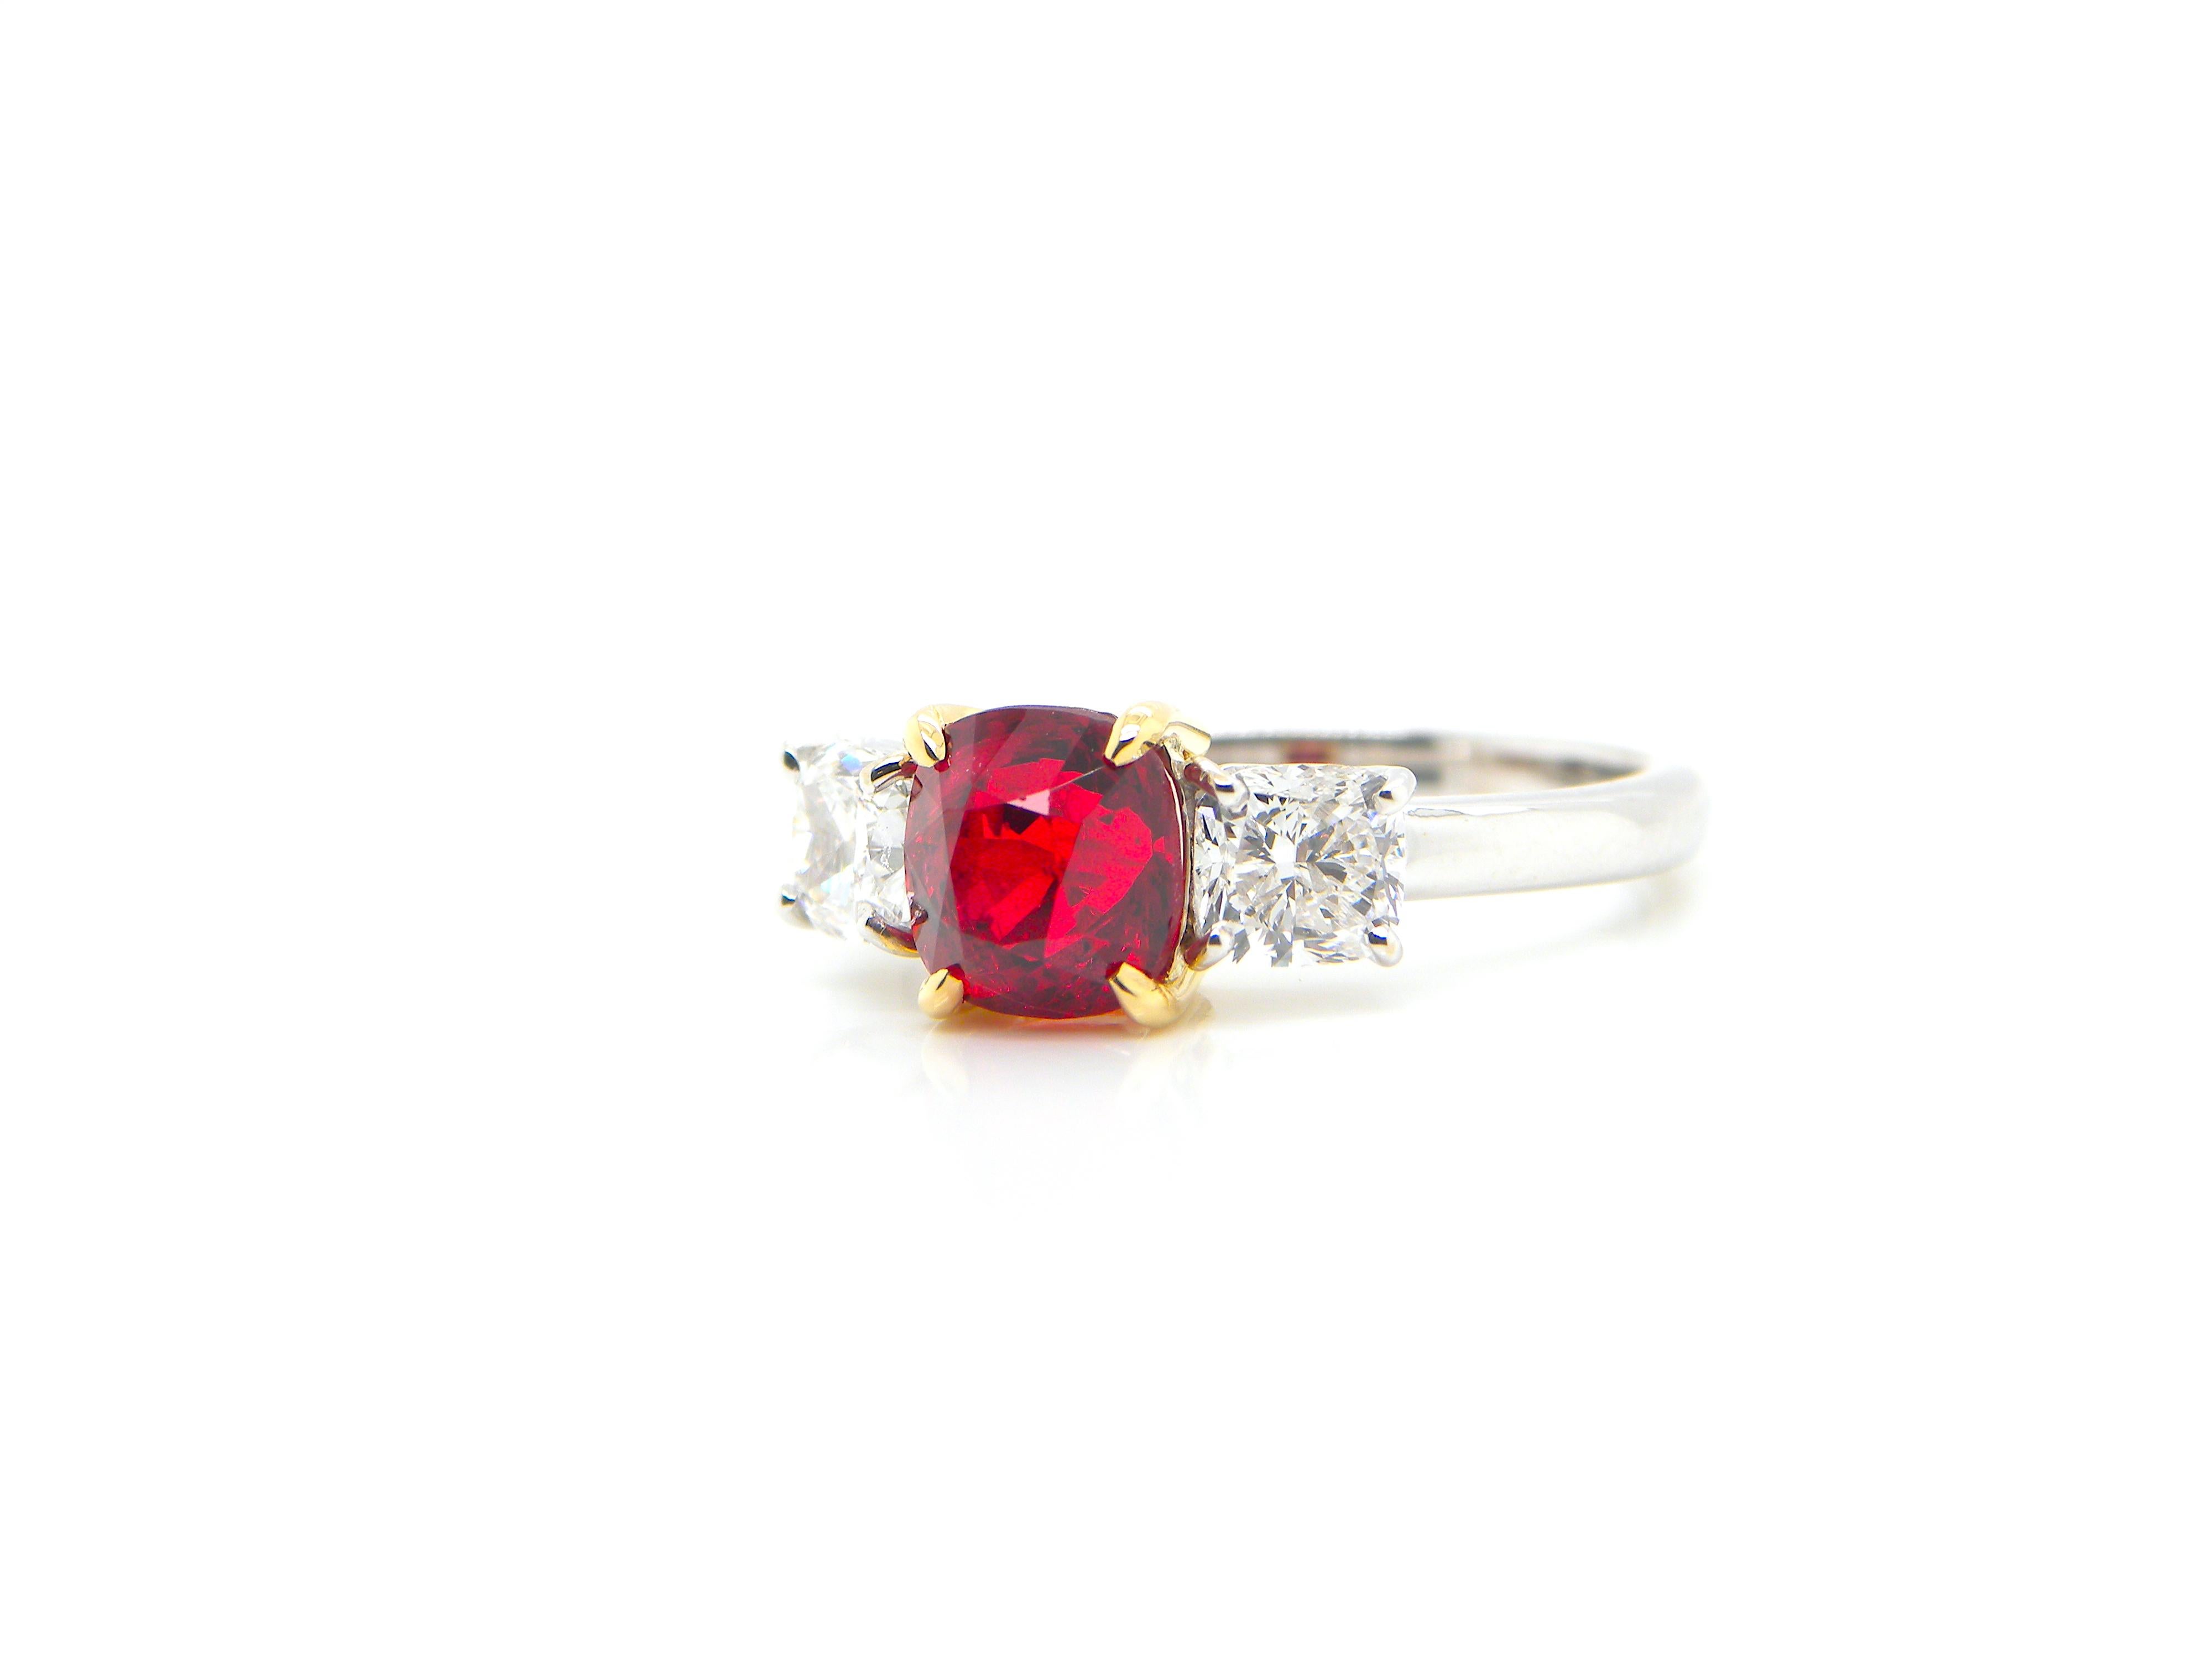 Women's or Men's 2.02 Carat GRS Certified Burma No Heat Vivid Red Spinel and White Diamond Ring